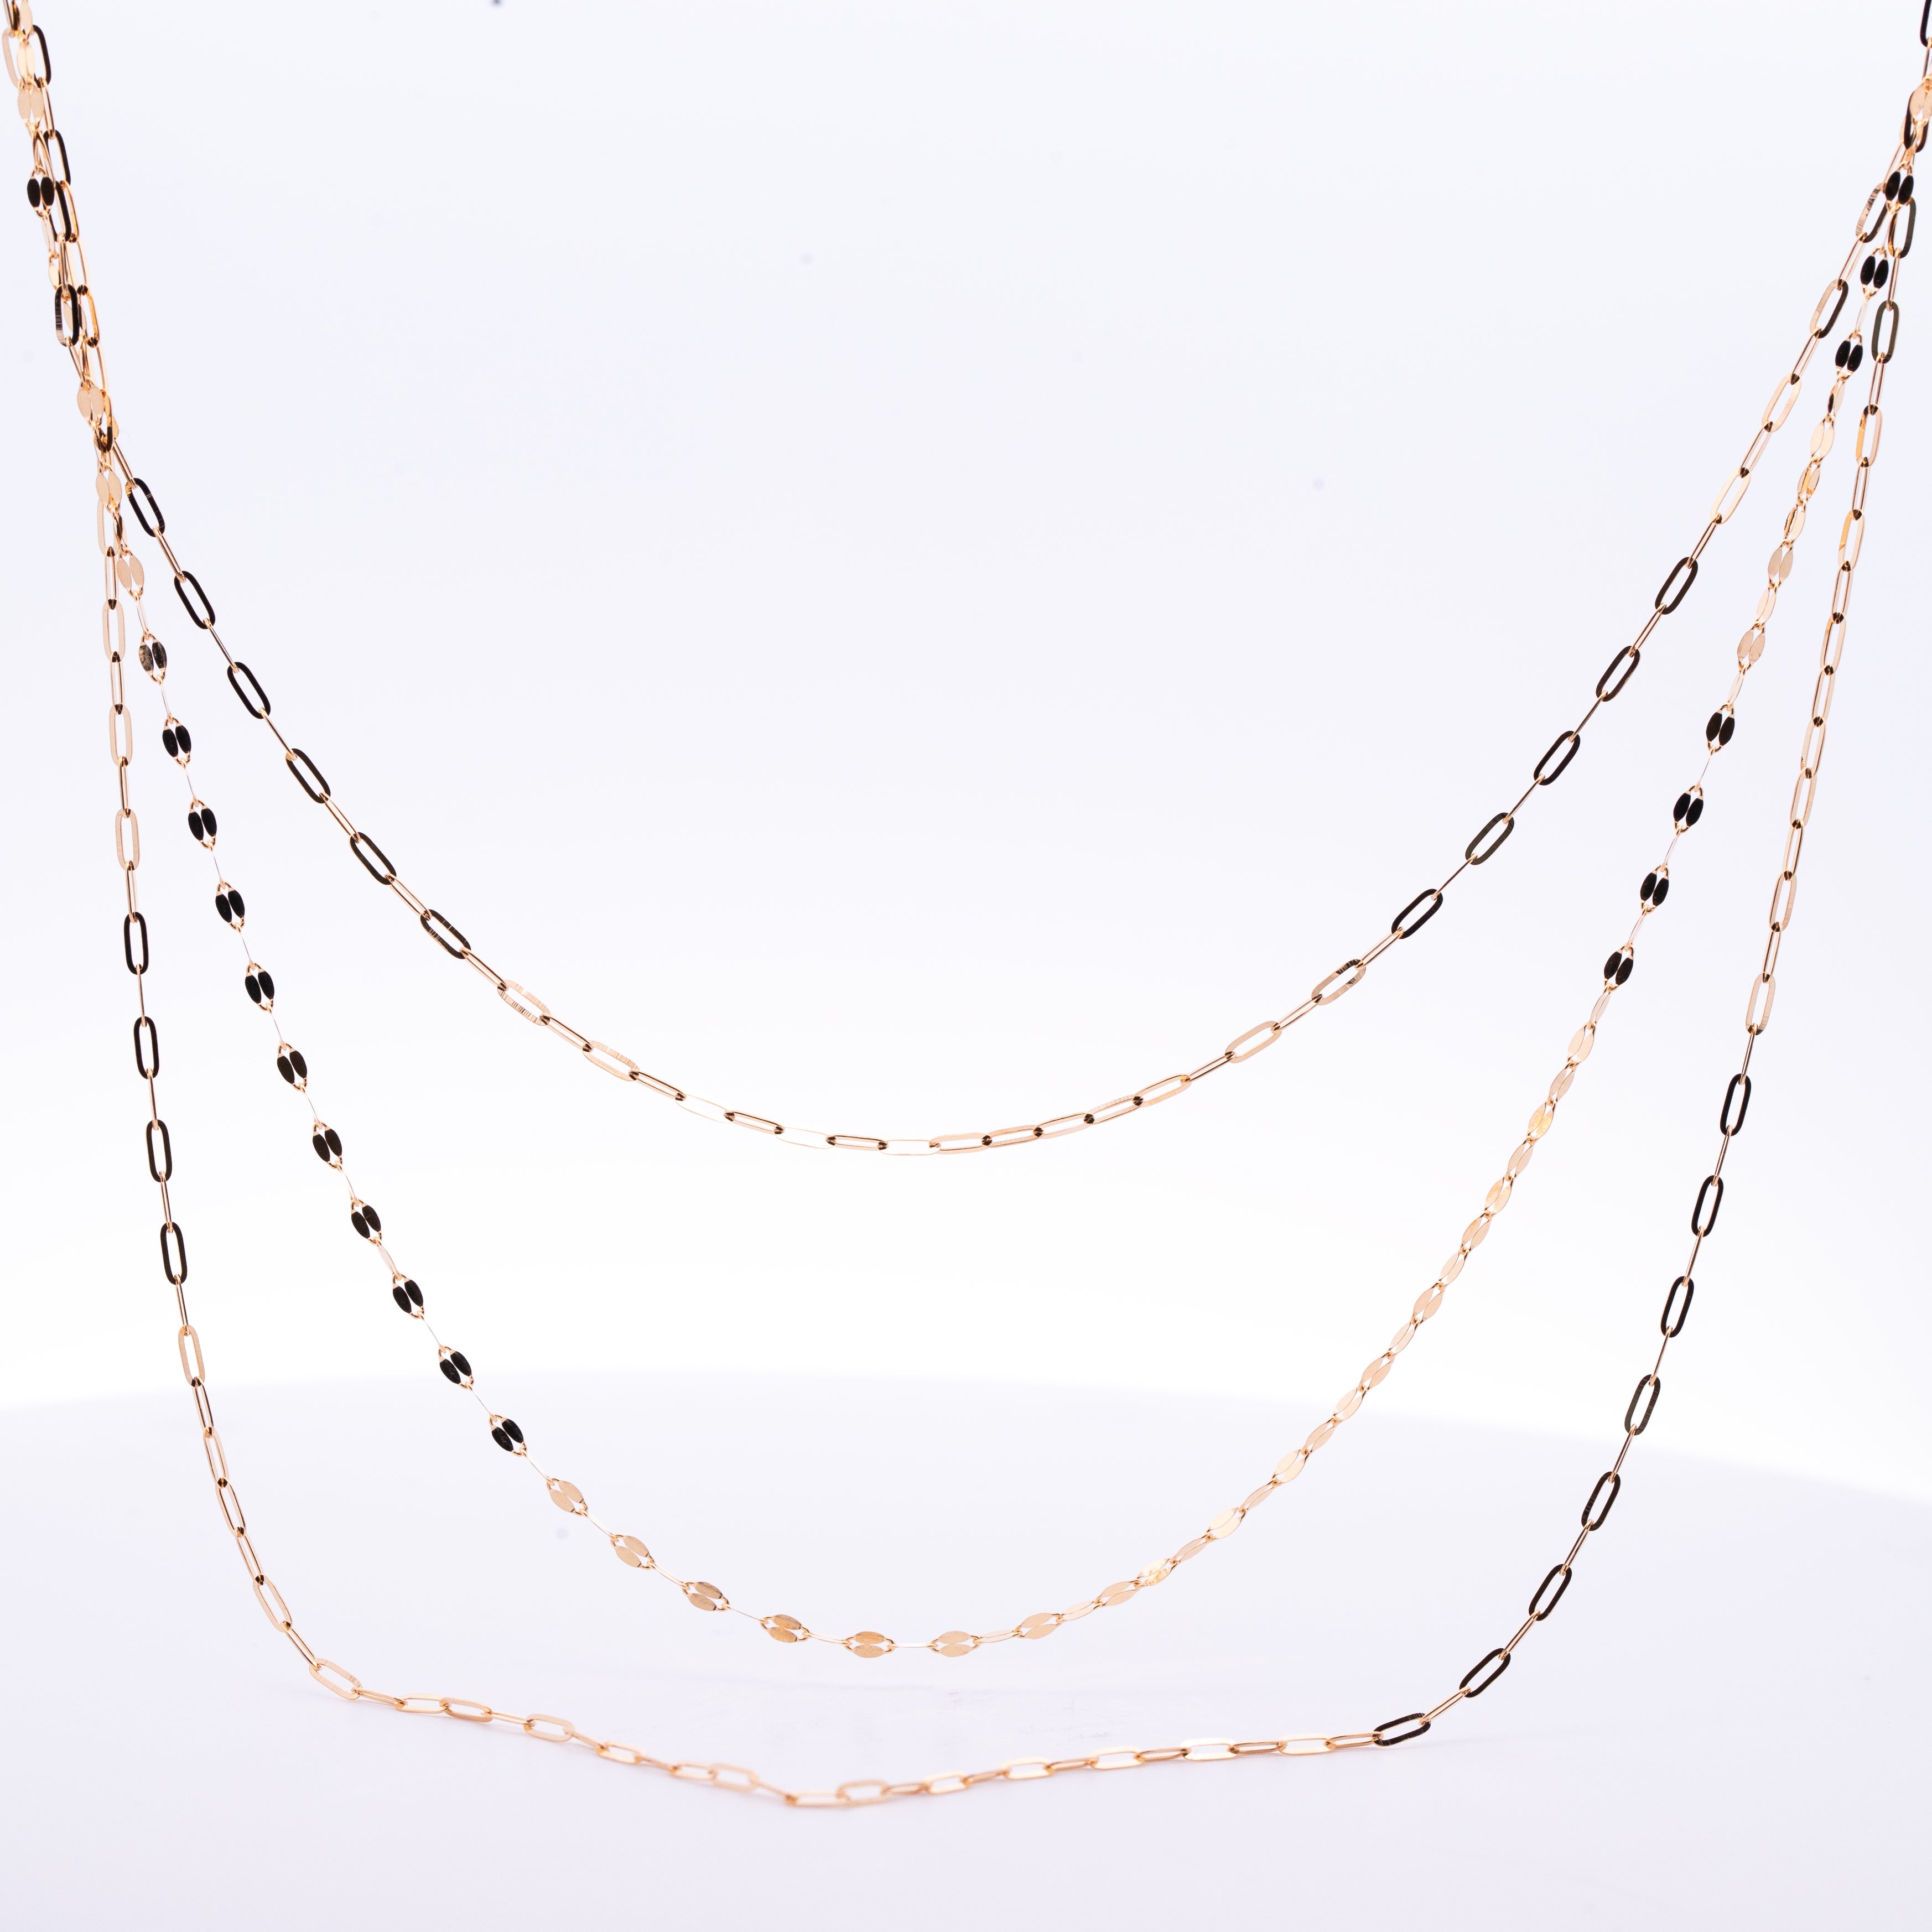 Multistrand Gold Necklace - Gold Necklaces